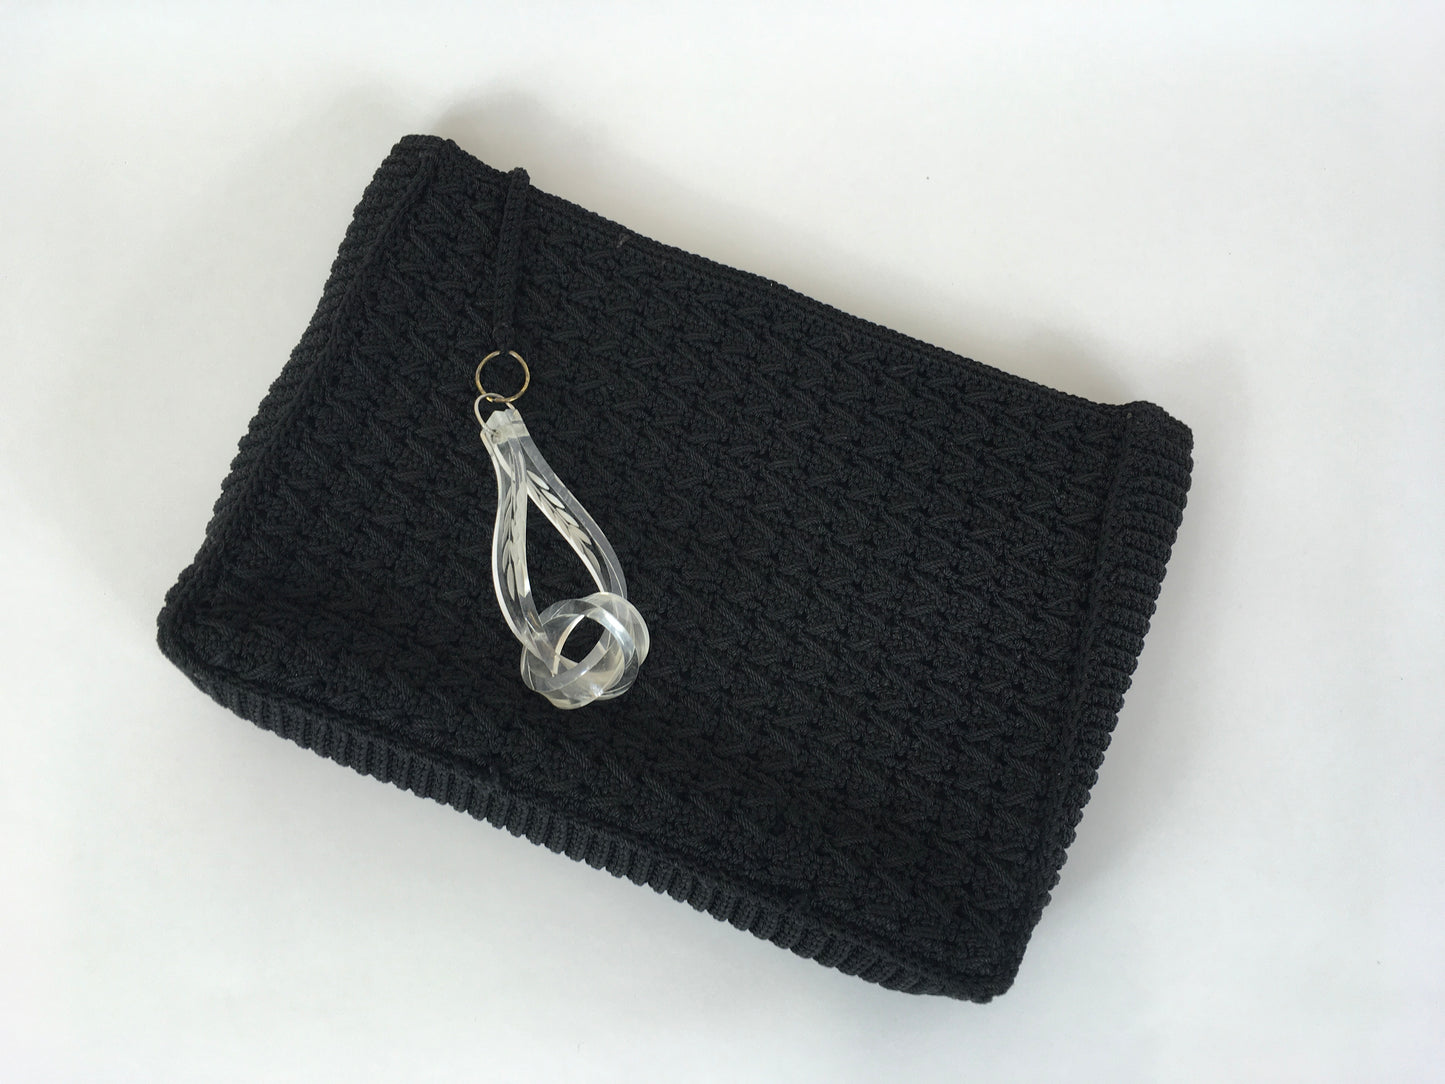 Original 1940’s Beautiful Crochet Clutch Bag in Black - With Large Lucite Pull